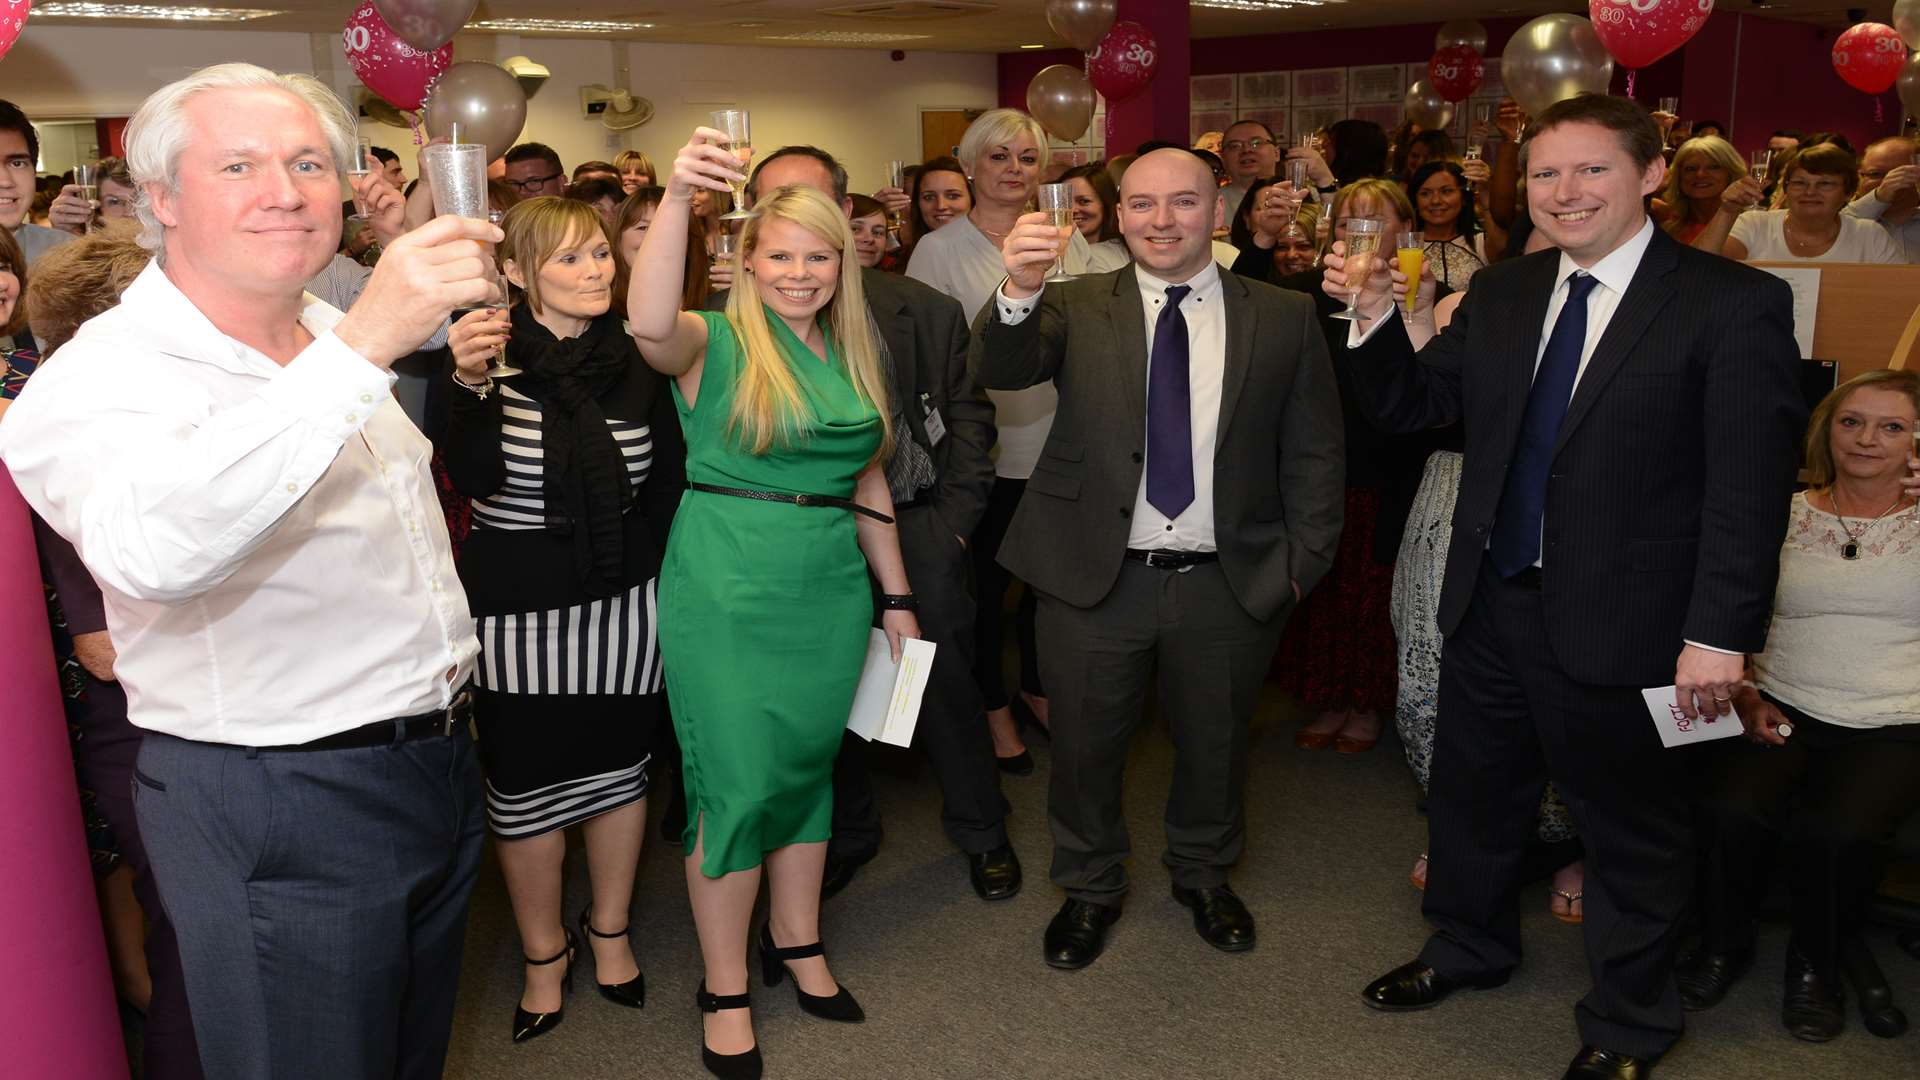 Staff at Facts International toast the firm's 30th anniversary